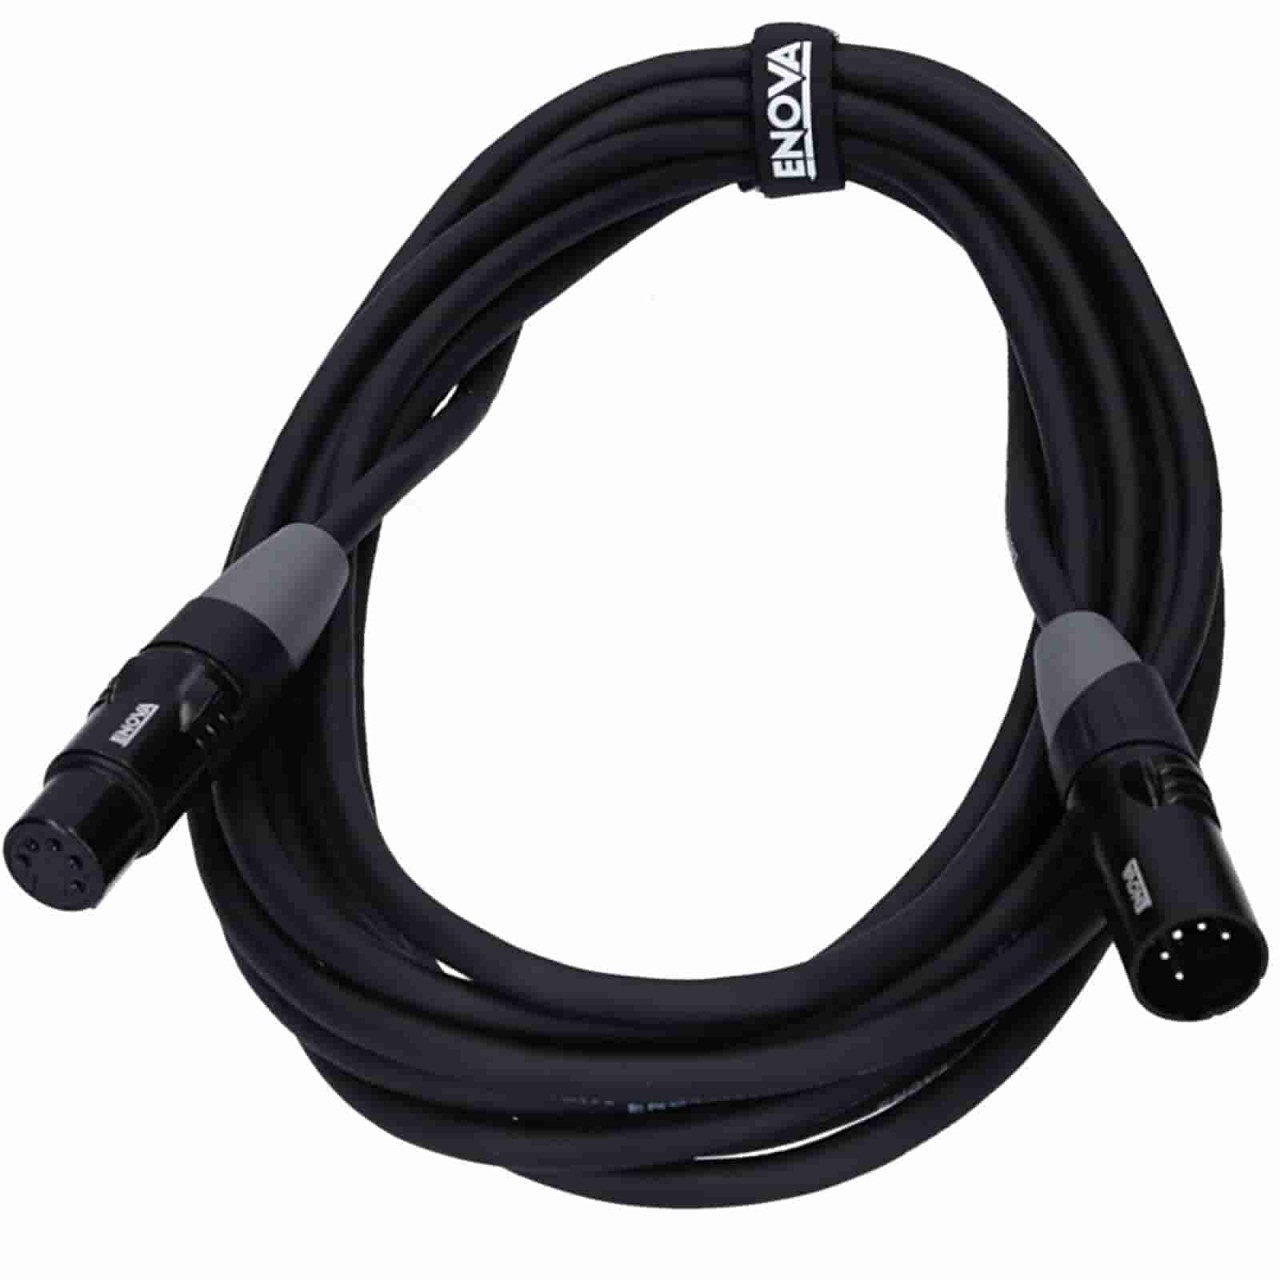 1 meter DMX cable with 5 pole XLR connector and velcro closure